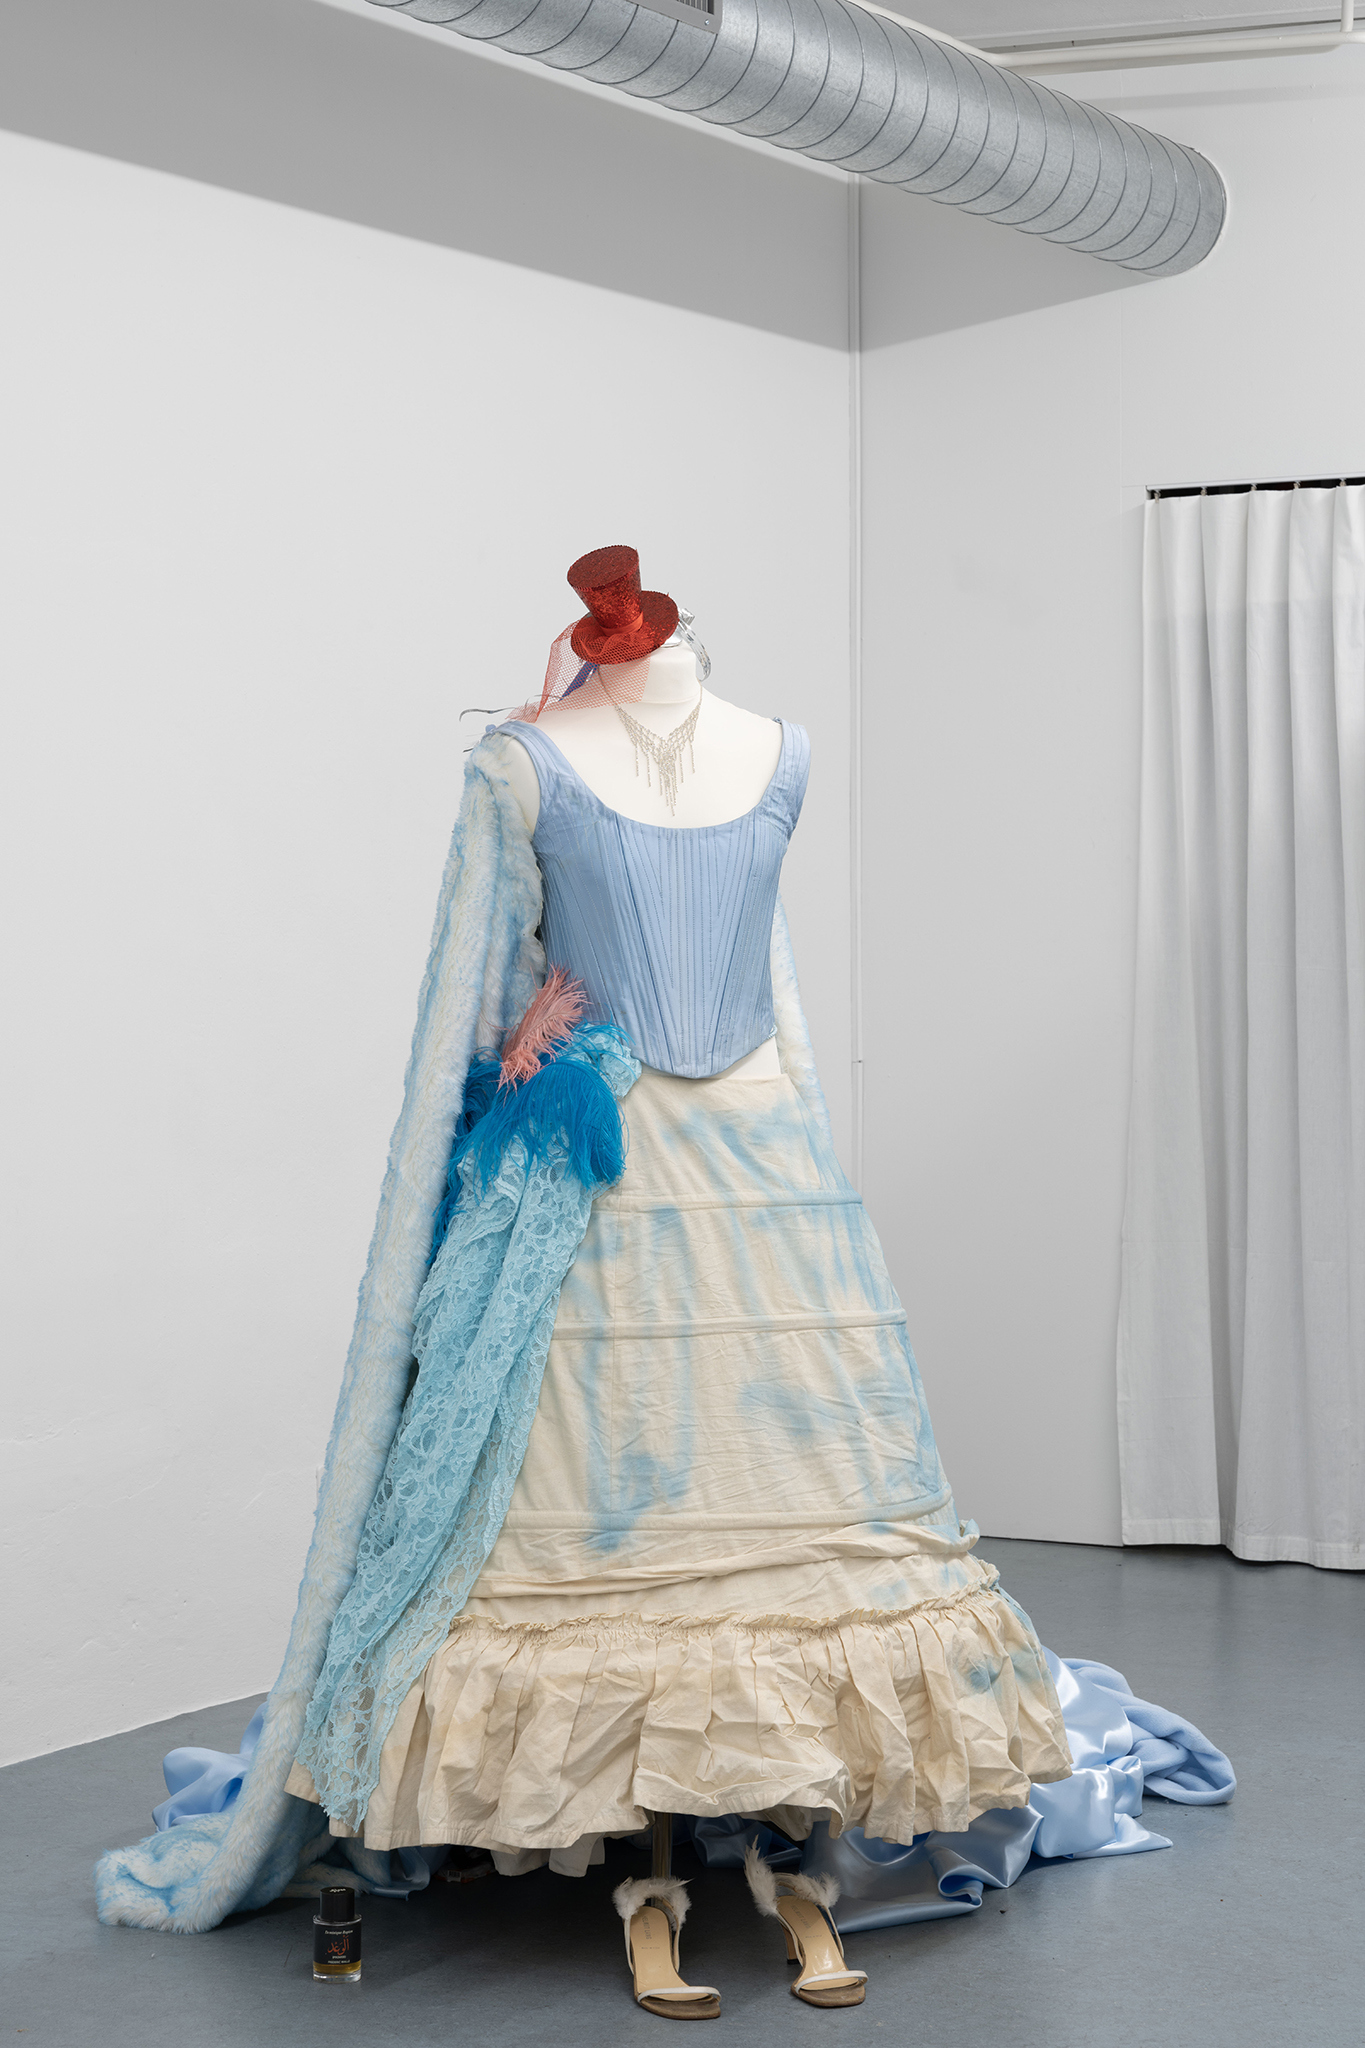 Nils Amadeus Lange, various fabrics draped over male dress form, Frederic Malle (Promise) perfume, vintage Helmut Lang high heels, worn in SKULPTURENGRUPPEN performed at Secession Vienna, 2022, among others